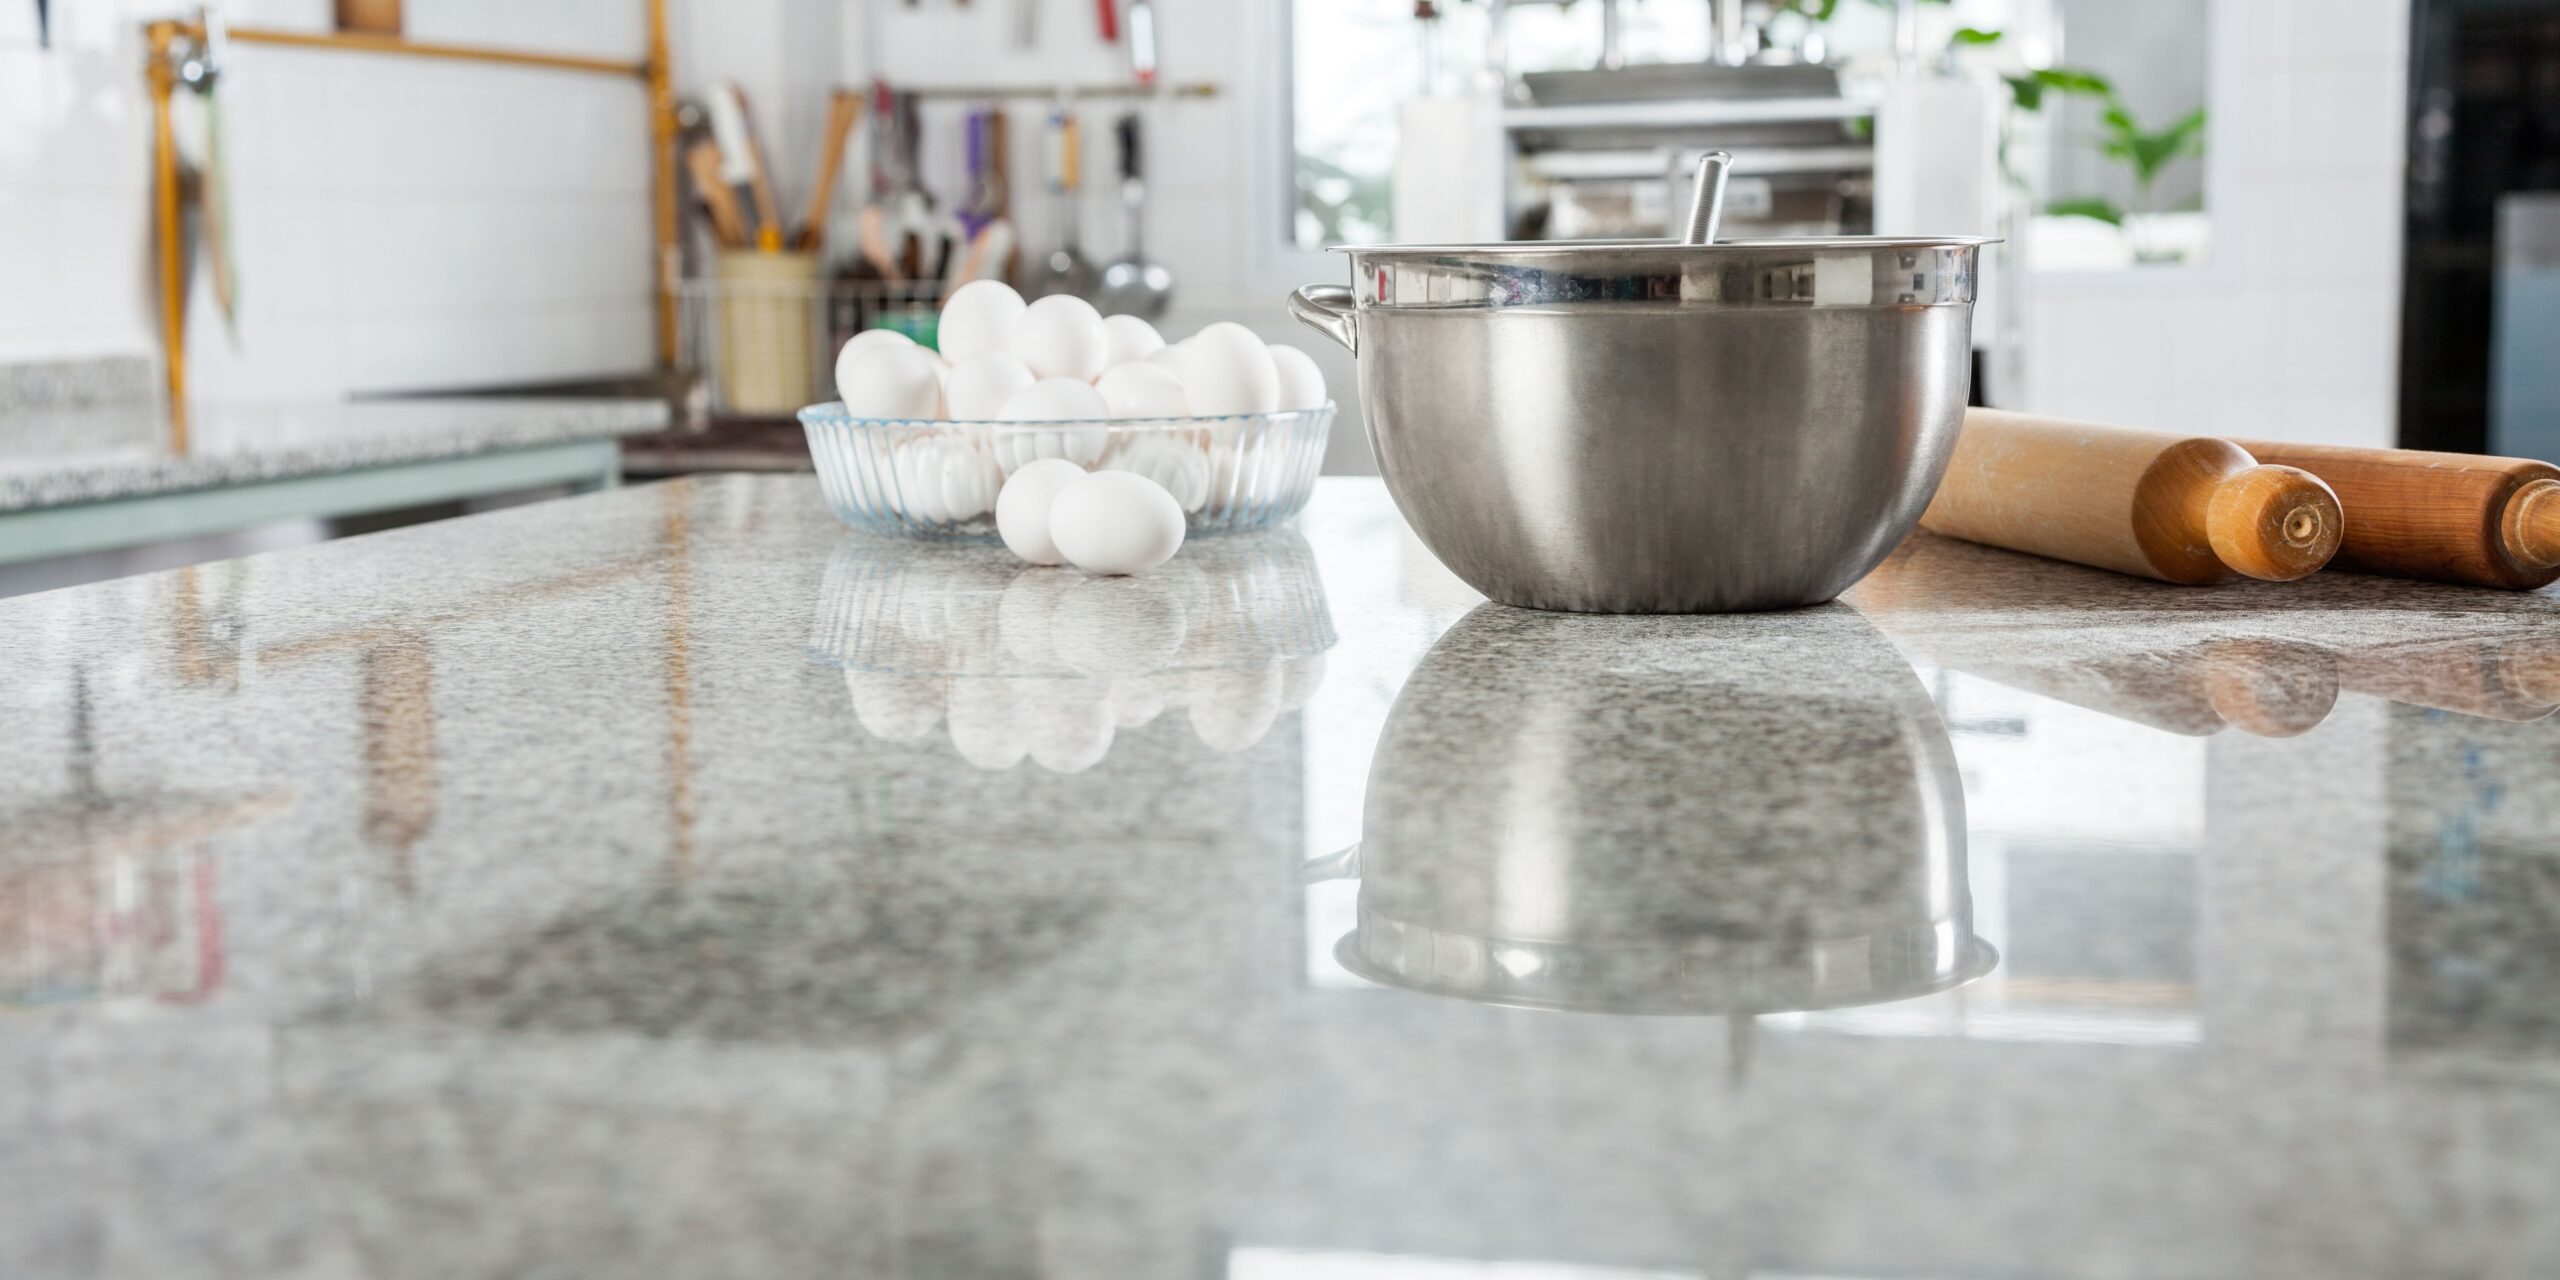 How To Clean Marble Countertops